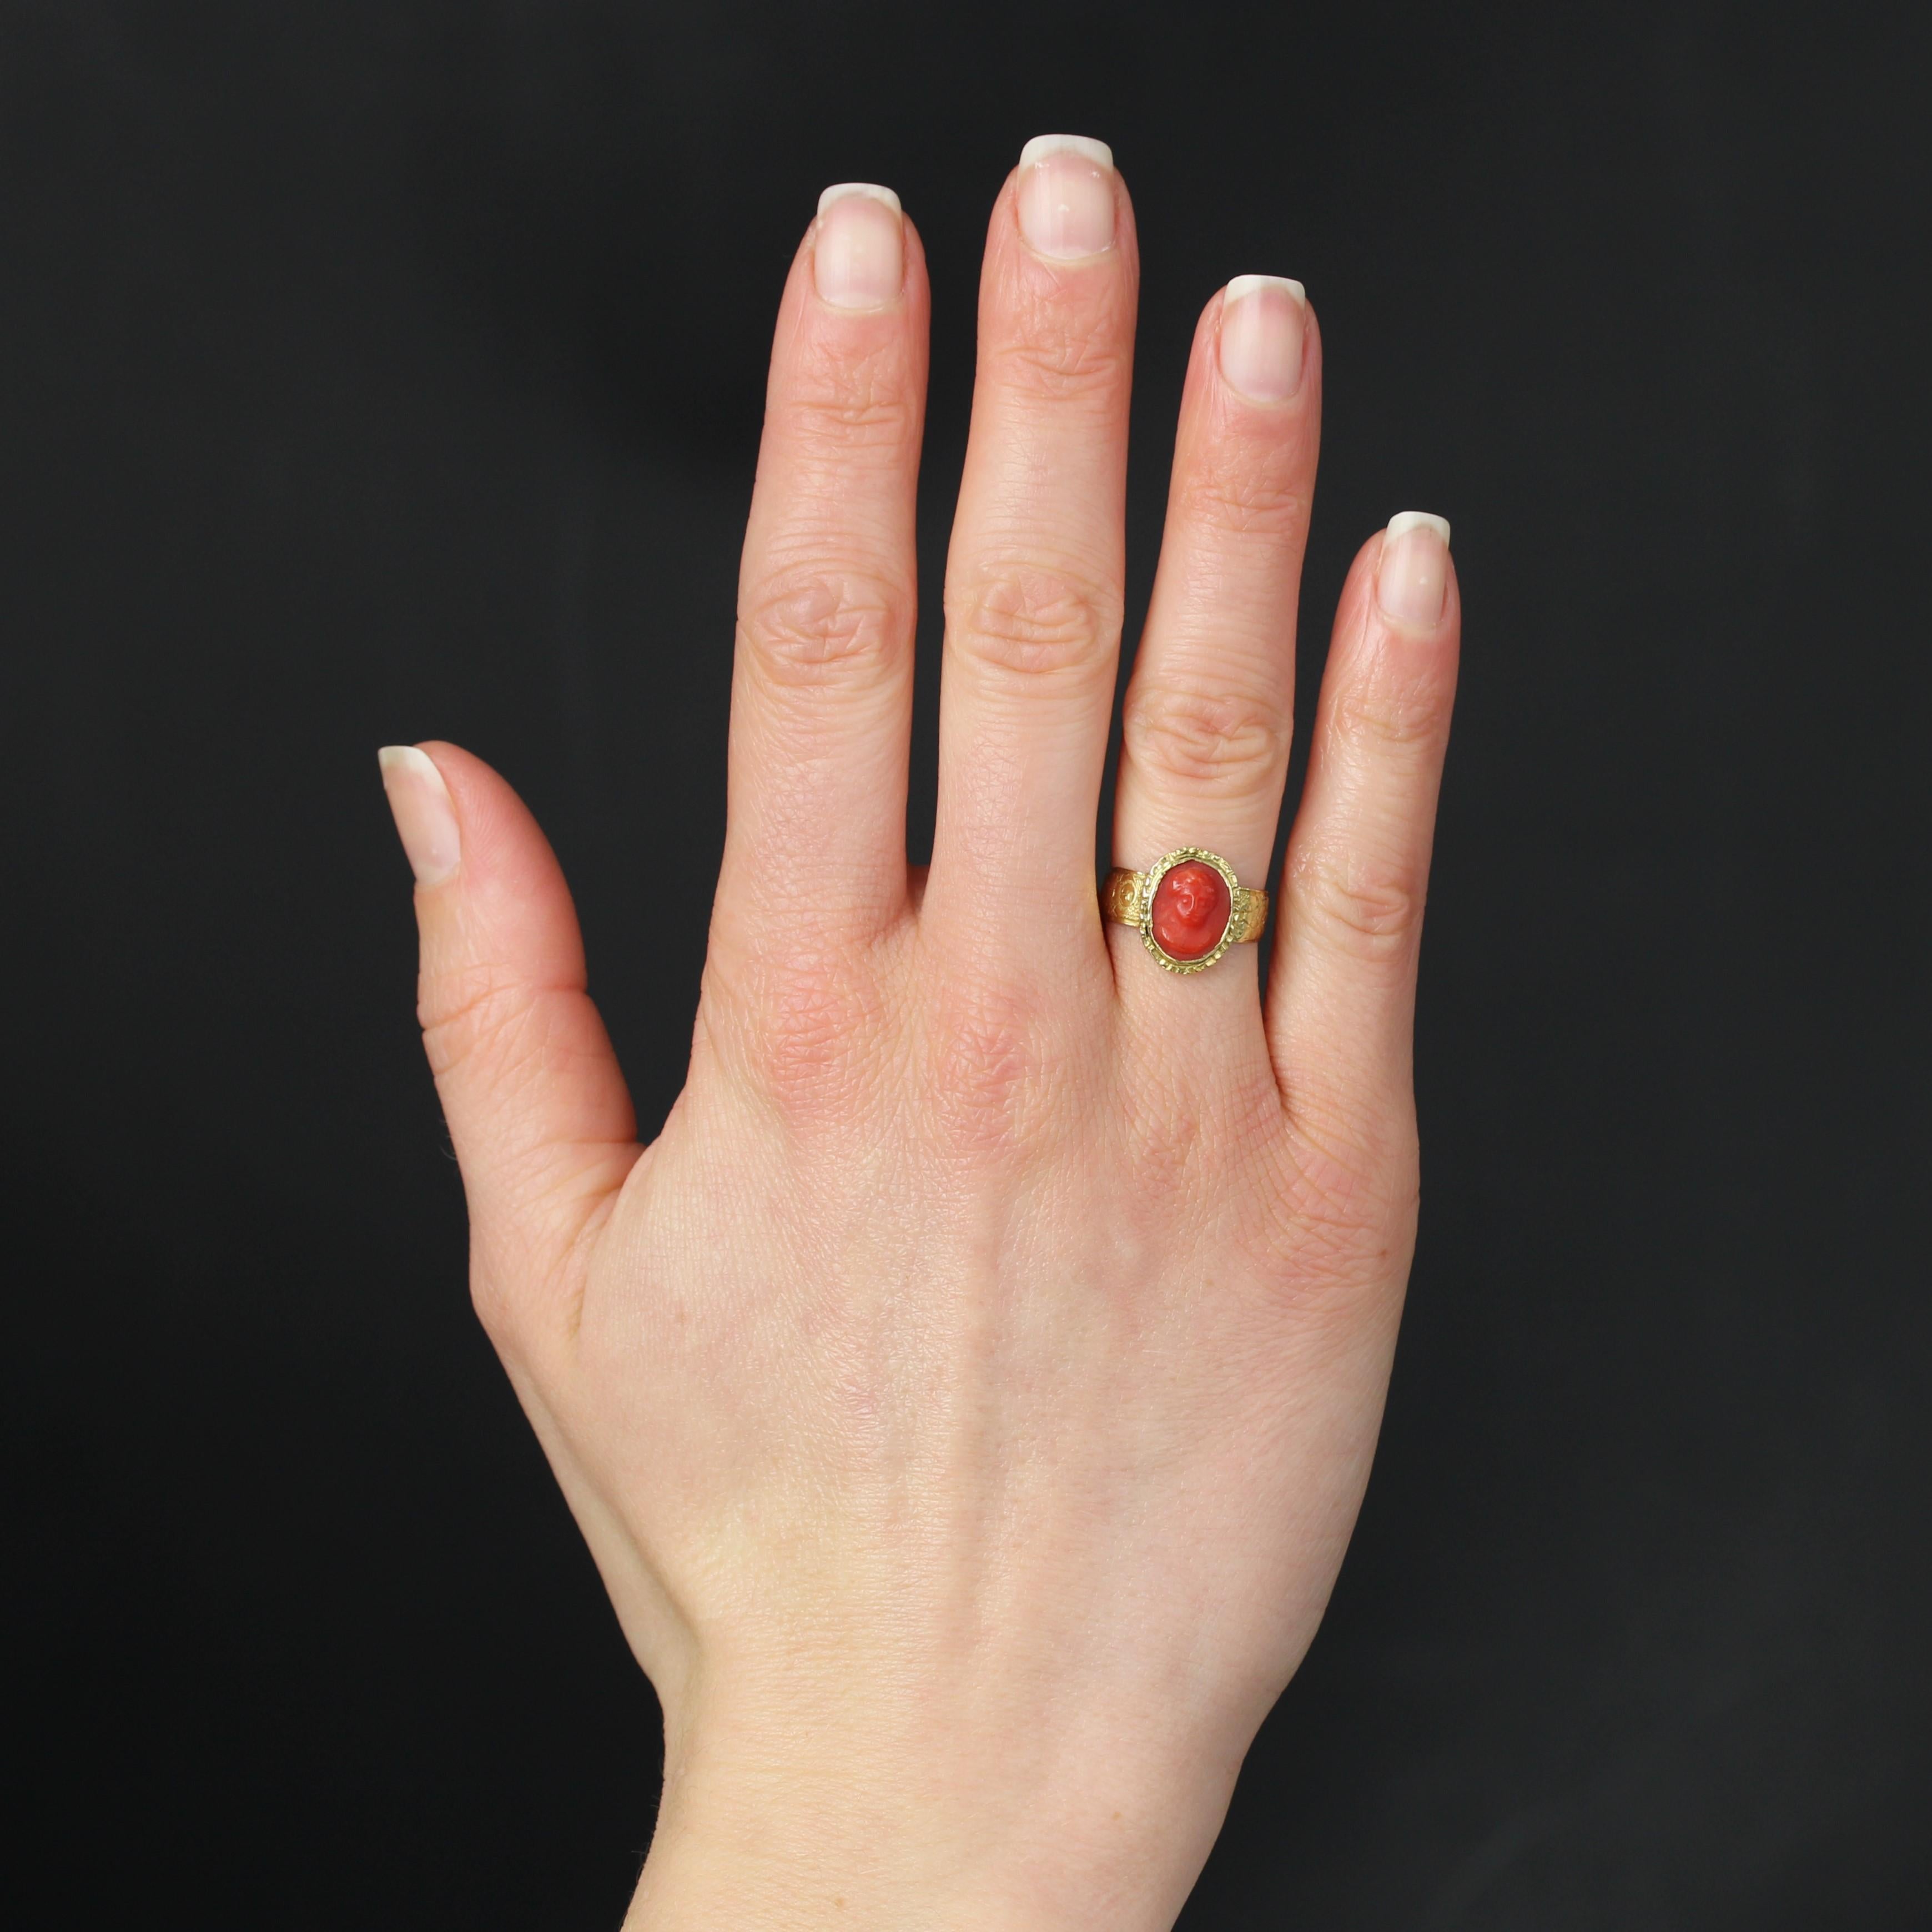 Ring in 18 karat yellow gold.
A charming antique ring in yellow gold, its band is engraved with floral motifs on either side of the opening and the head is adorned with a cameo on coral representing a child's face. Small chasing details surround the